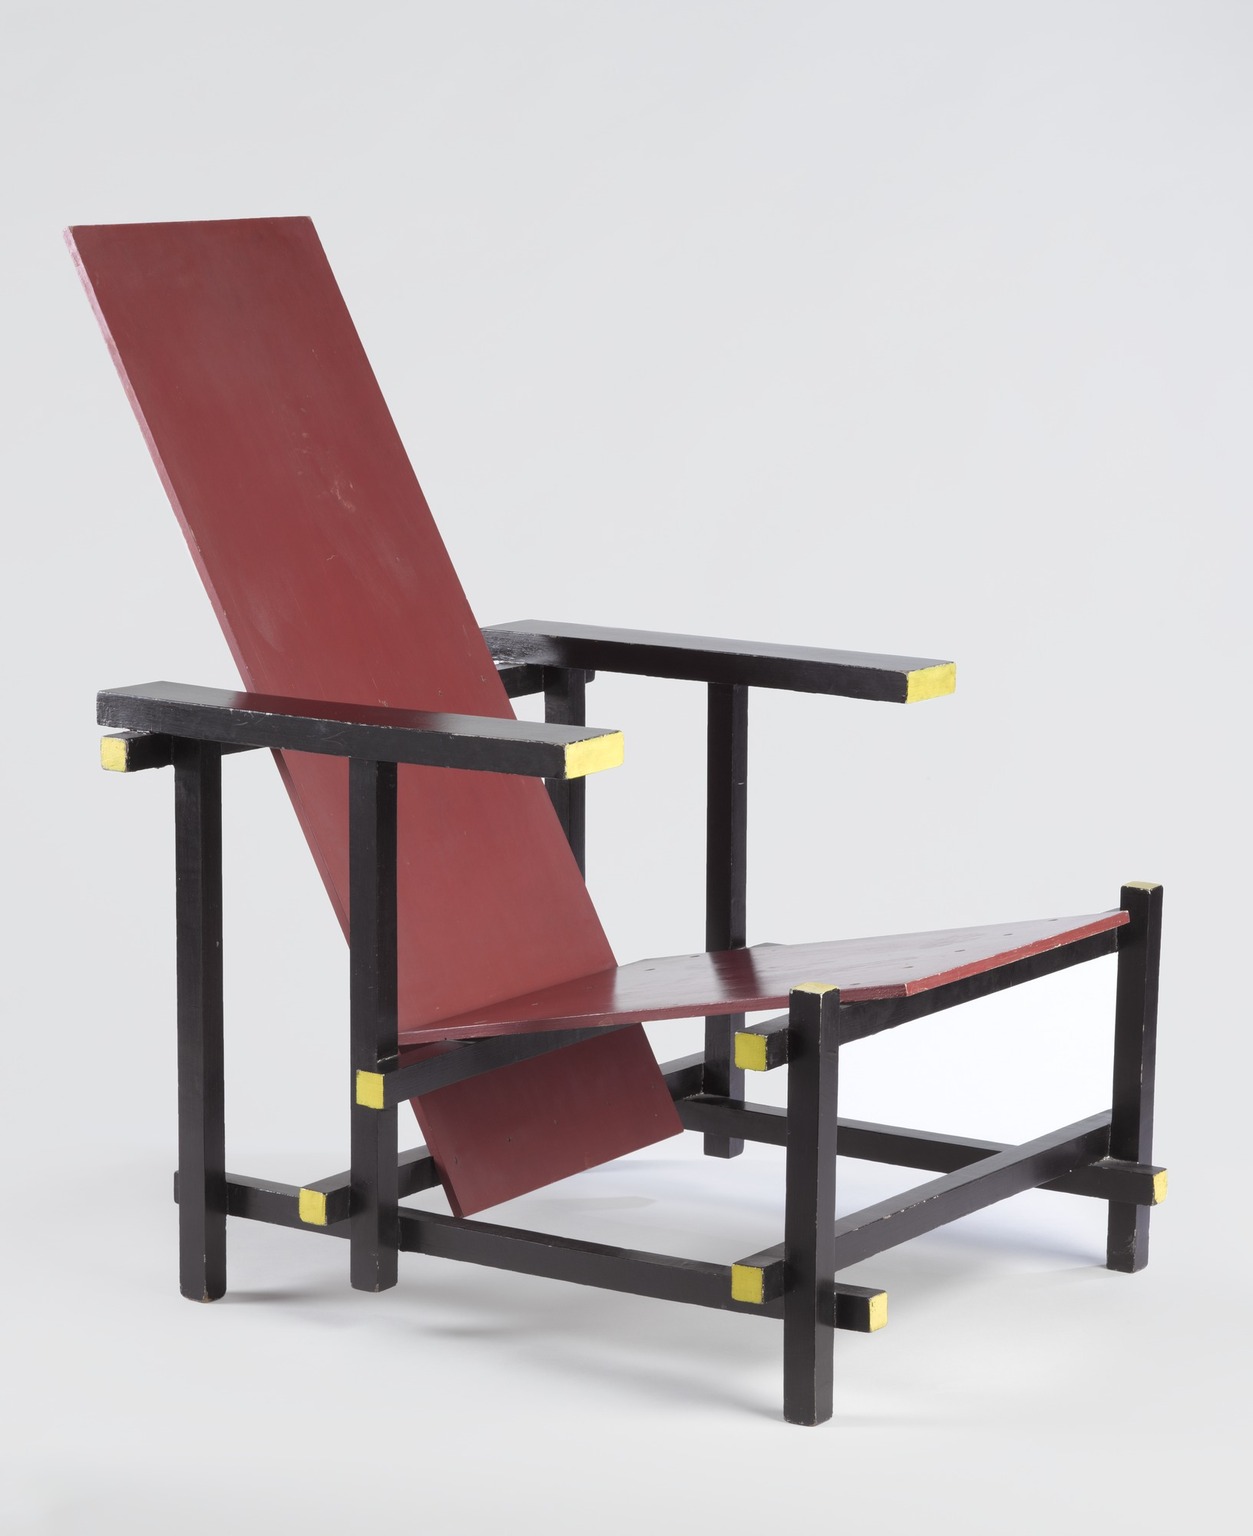 The Red and Blue Chair: Shown from the side, which shows off the yellow accents along the edges. 